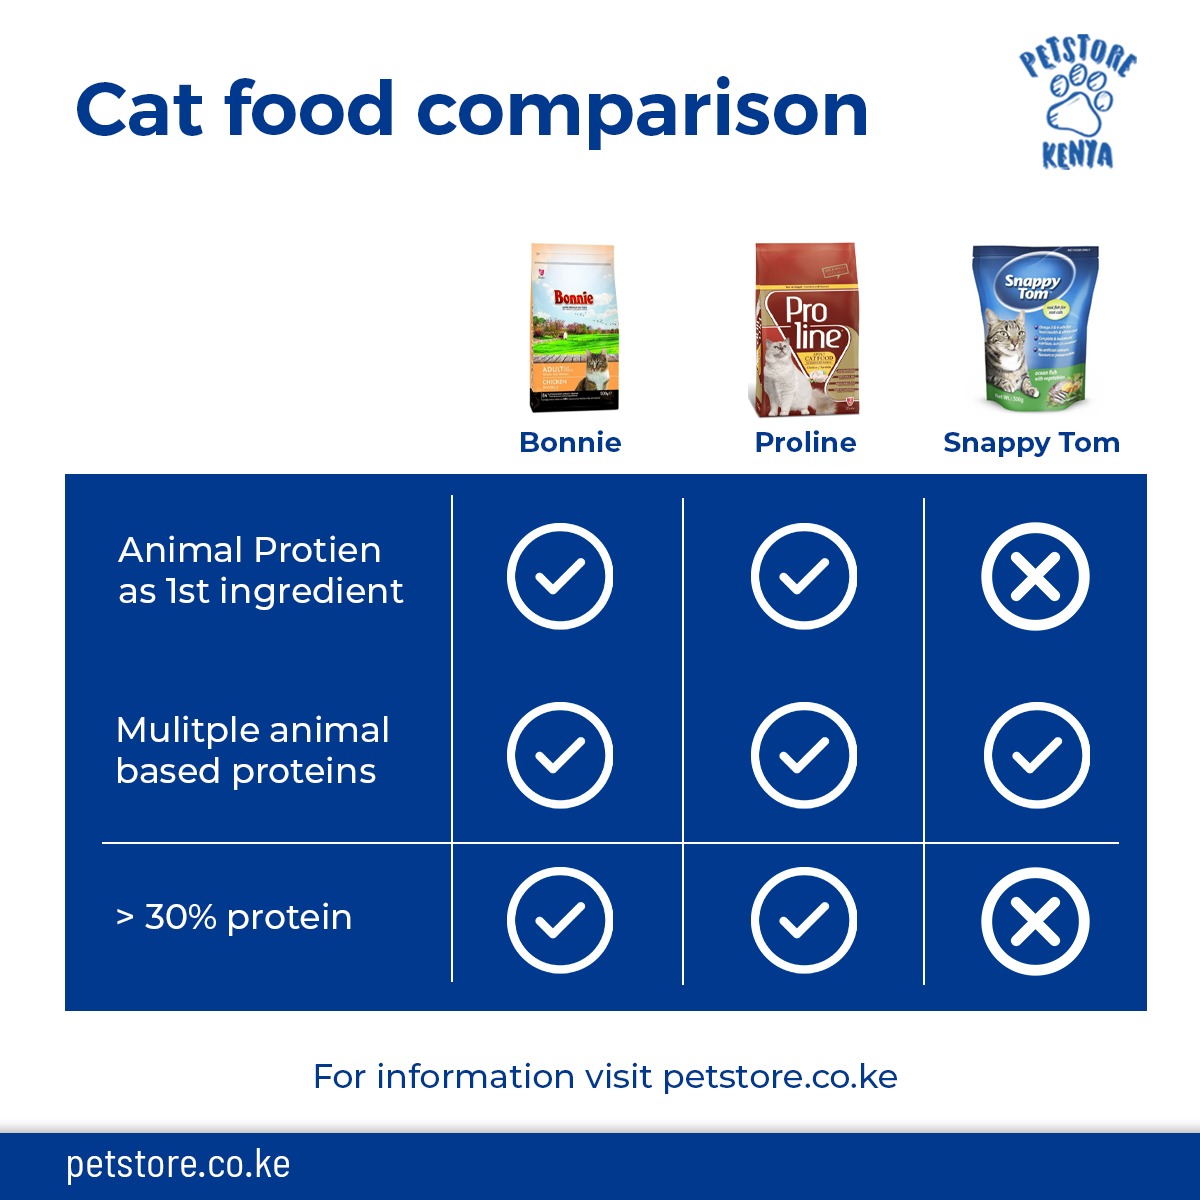 How does your cat food compare?🐱🧐

We hope that by using this comparison chart, you can make an informed decision about which brand of cat food is right for your feline friend 🐱❤.

#somalabel #wednesdaywisdom #catfood #catfoodbowl #nutrition